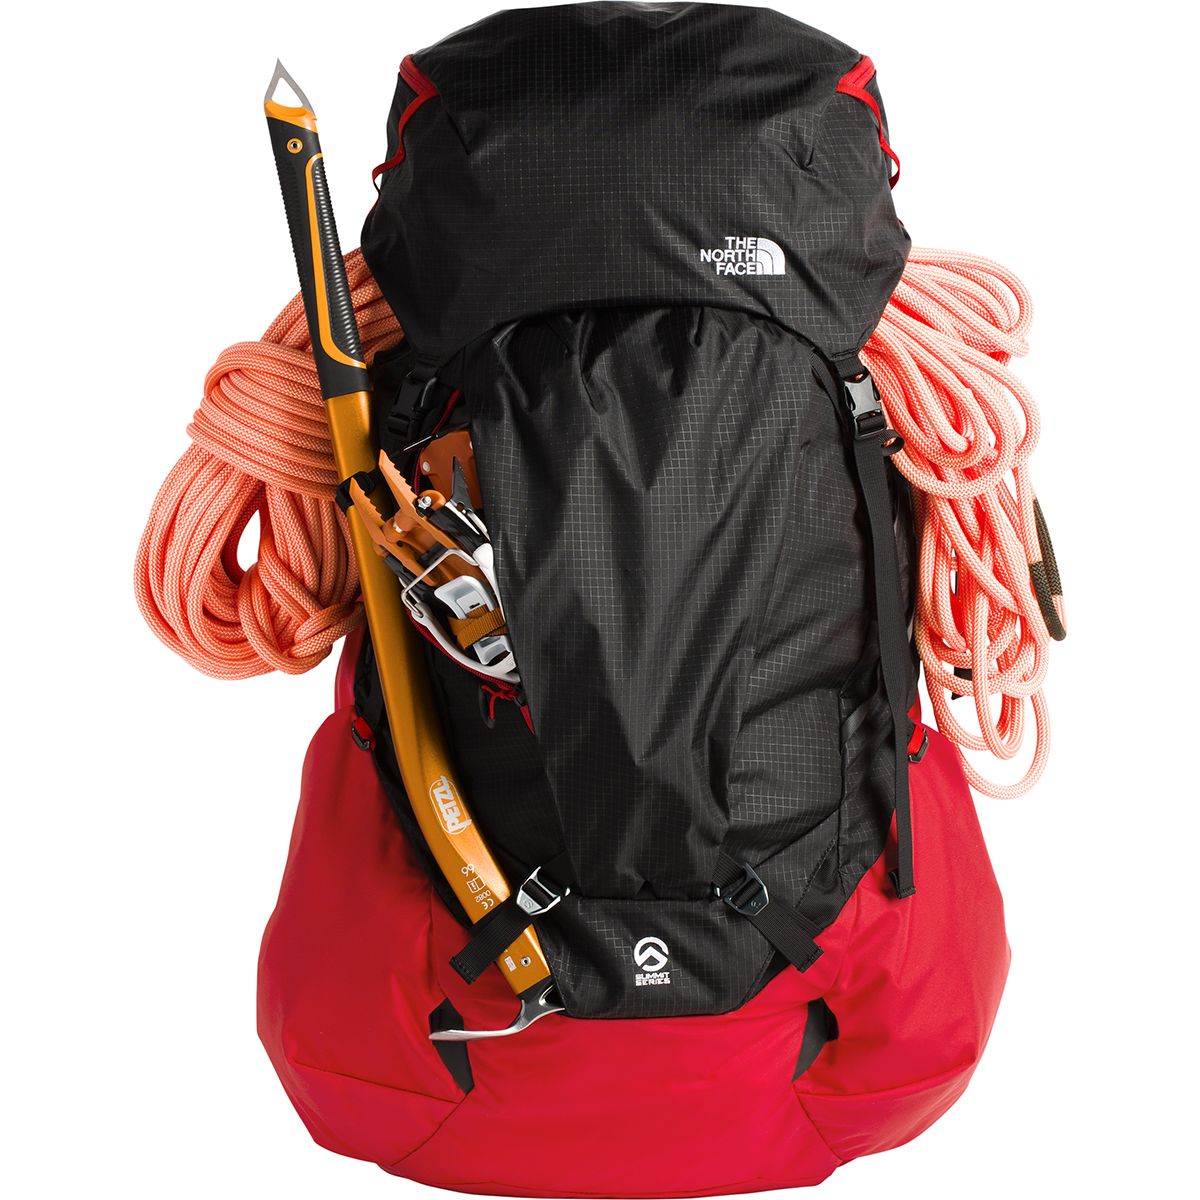 The North Face Prophet 100 Backpack - Hike & Camp